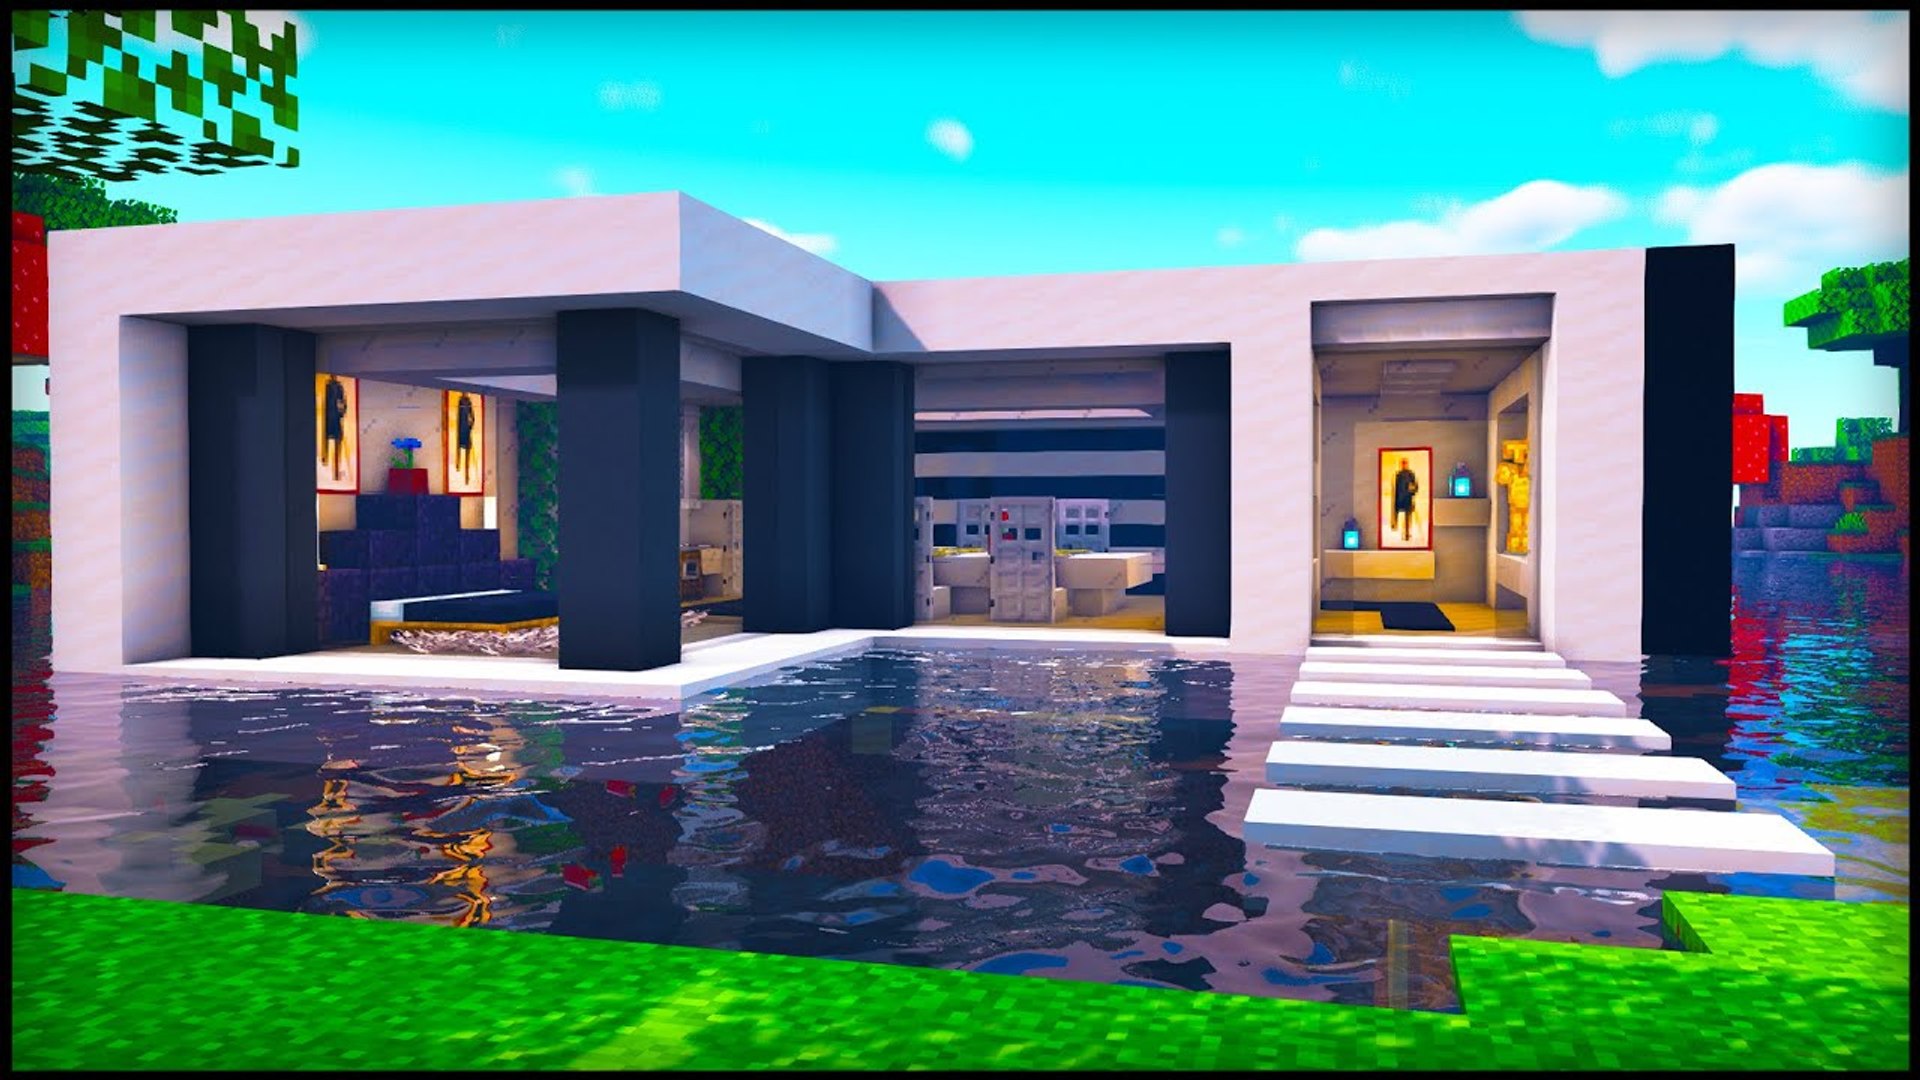 Minecraft- Water Modern House - How to build a Cool Modern House on Water  Tutorial